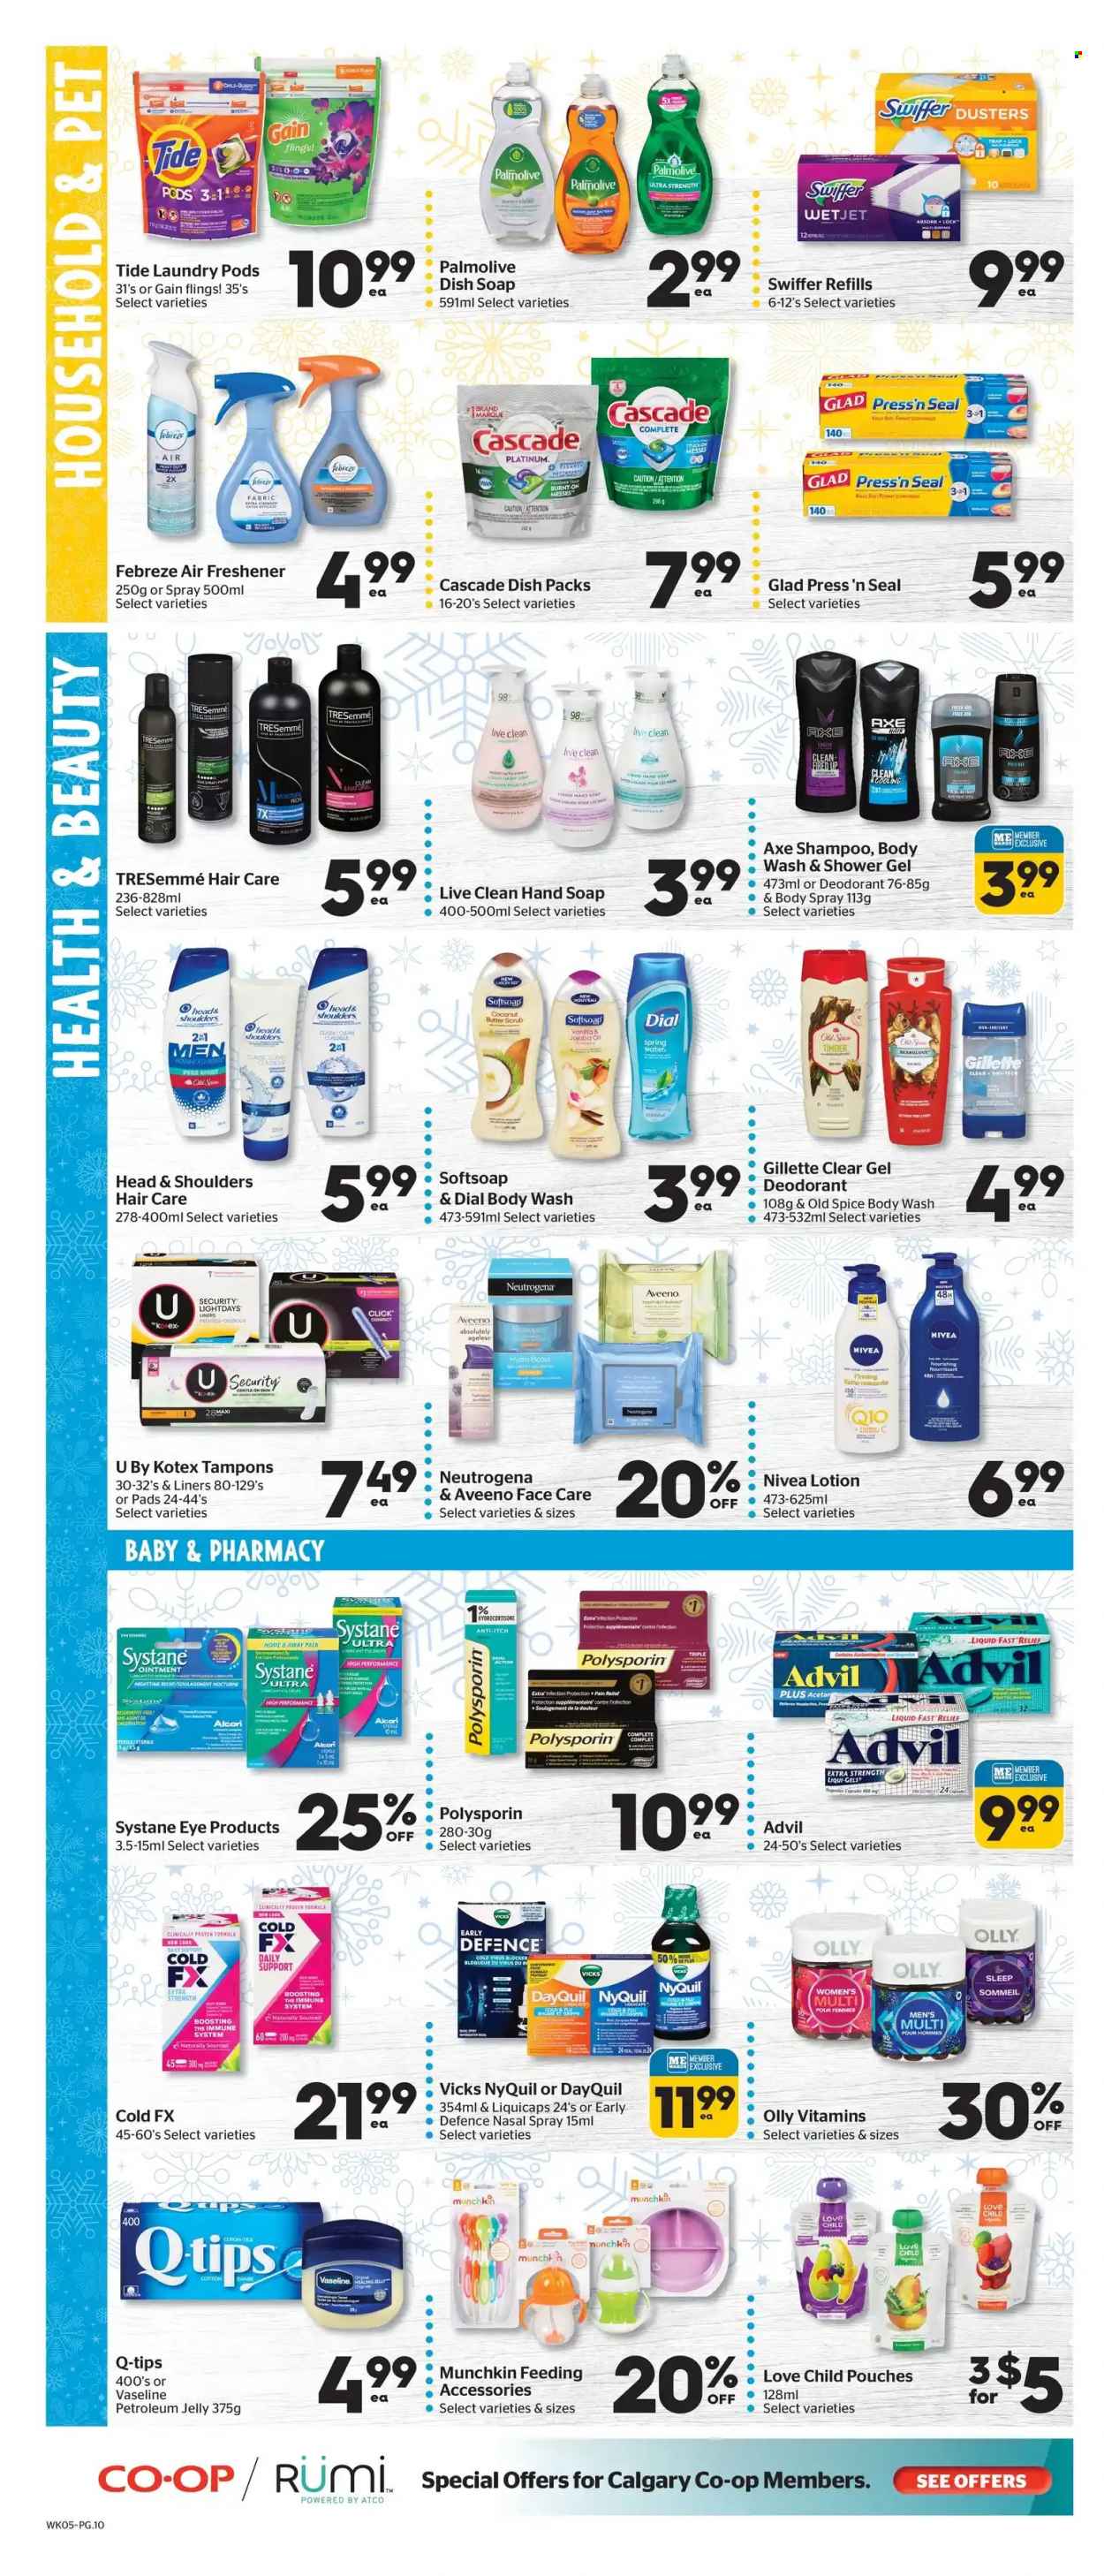 thumbnail - Calgary Co-op Flyer - December 01, 2022 - December 07, 2022 - Sales products - butter, spice, spring water, Boost, Aveeno, Nivea, petroleum jelly, Febreze, Gain, Swiffer, Tide, Cascade, body wash, shower gel, Softsoap, hand soap, Palmolive, Vaseline, Dial, soap, Kotex, tampons, Gillette, TRESemmé, body lotion, body spray, anti-perspirant, Axe, Vicks, pain relief, DayQuil, NyQuil, eye drops, Advil Rapid, nasal spray, Neutrogena, shampoo, Systane, Head & Shoulders, Old Spice, deodorant. Page 14.